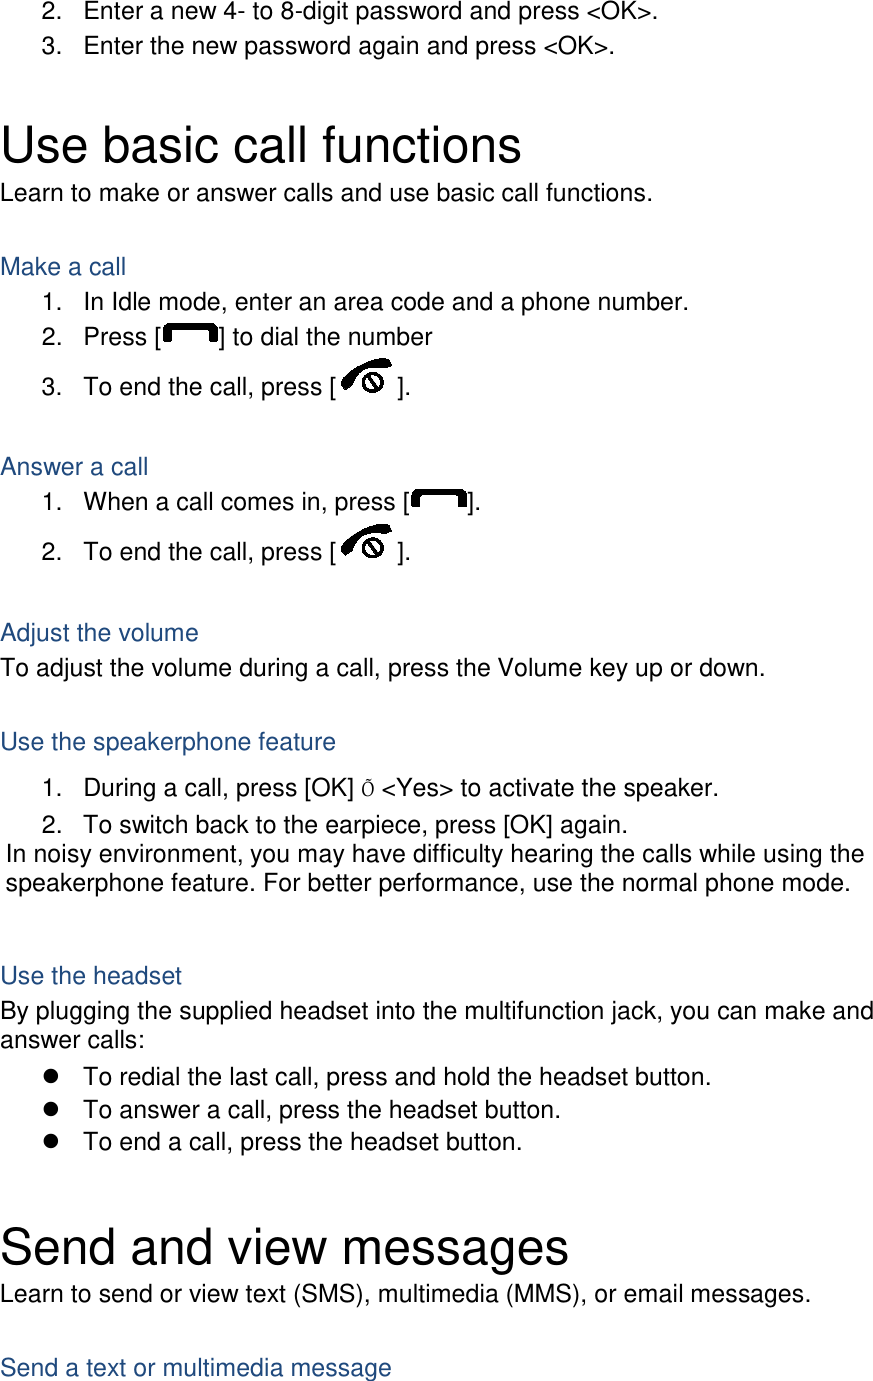 2. Enter a new 4- to 8-digit password and press &lt;OK&gt;. 3. Enter the new password again and press &lt;OK&gt;.  Use basic call functions Learn to make or answer calls and use basic call functions.  Make a call 1. In Idle mode, enter an area code and a phone number. 2. Press [ ] to dial the number 3. To end the call, press [ ].    Answer a call 1. When a call comes in, press [ ]. 2. To end the call, press [ ].  Adjust the volume To adjust the volume during a call, press the Volume key up or down.  Use the speakerphone feature 1. During a call, press [OK] Õ &lt;Yes&gt; to activate the speaker. 2. To switch back to the earpiece, press [OK] again. In noisy environment, you may have difficulty hearing the calls while using the speakerphone feature. For better performance, use the normal phone mode.  Use the headset By plugging the supplied headset into the multifunction jack, you can make and answer calls:  To redial the last call, press and hold the headset button.  To answer a call, press the headset button.  To end a call, press the headset button.  Send and view messages Learn to send or view text (SMS), multimedia (MMS), or email messages.  Send a text or multimedia message 